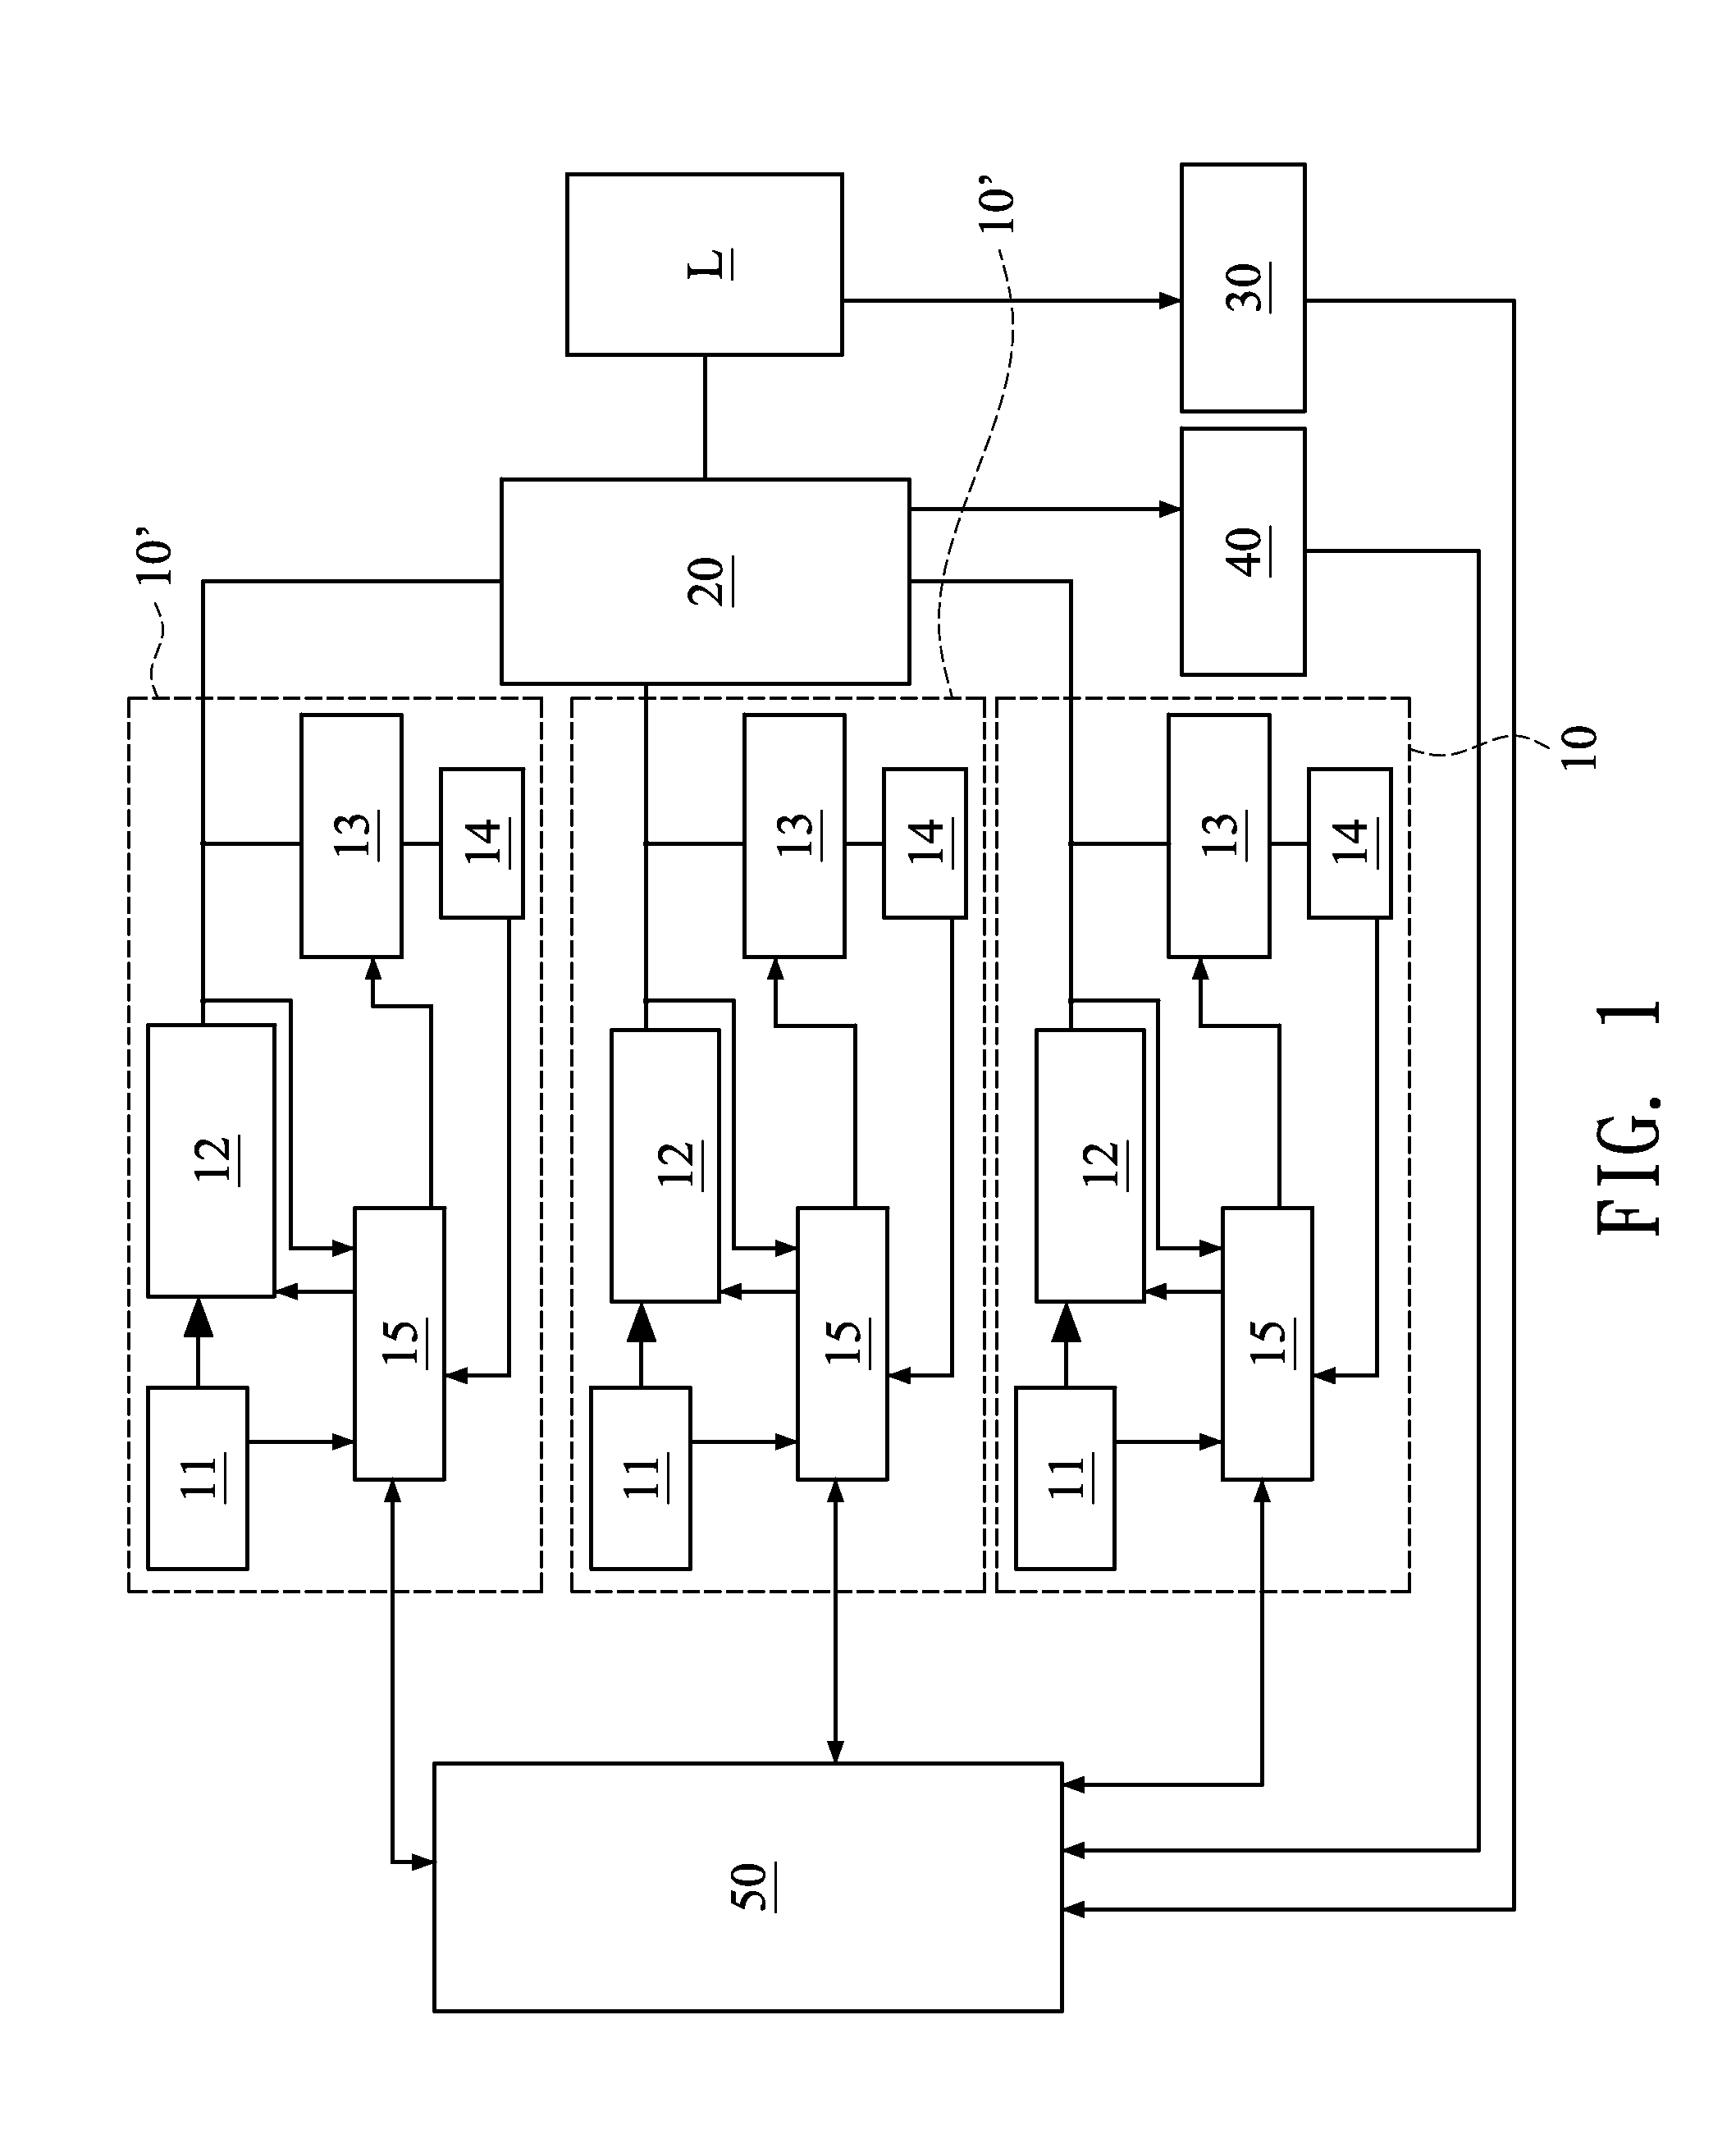 System of a plurality of series-connected fuel cell converter devices and method for controlling the system